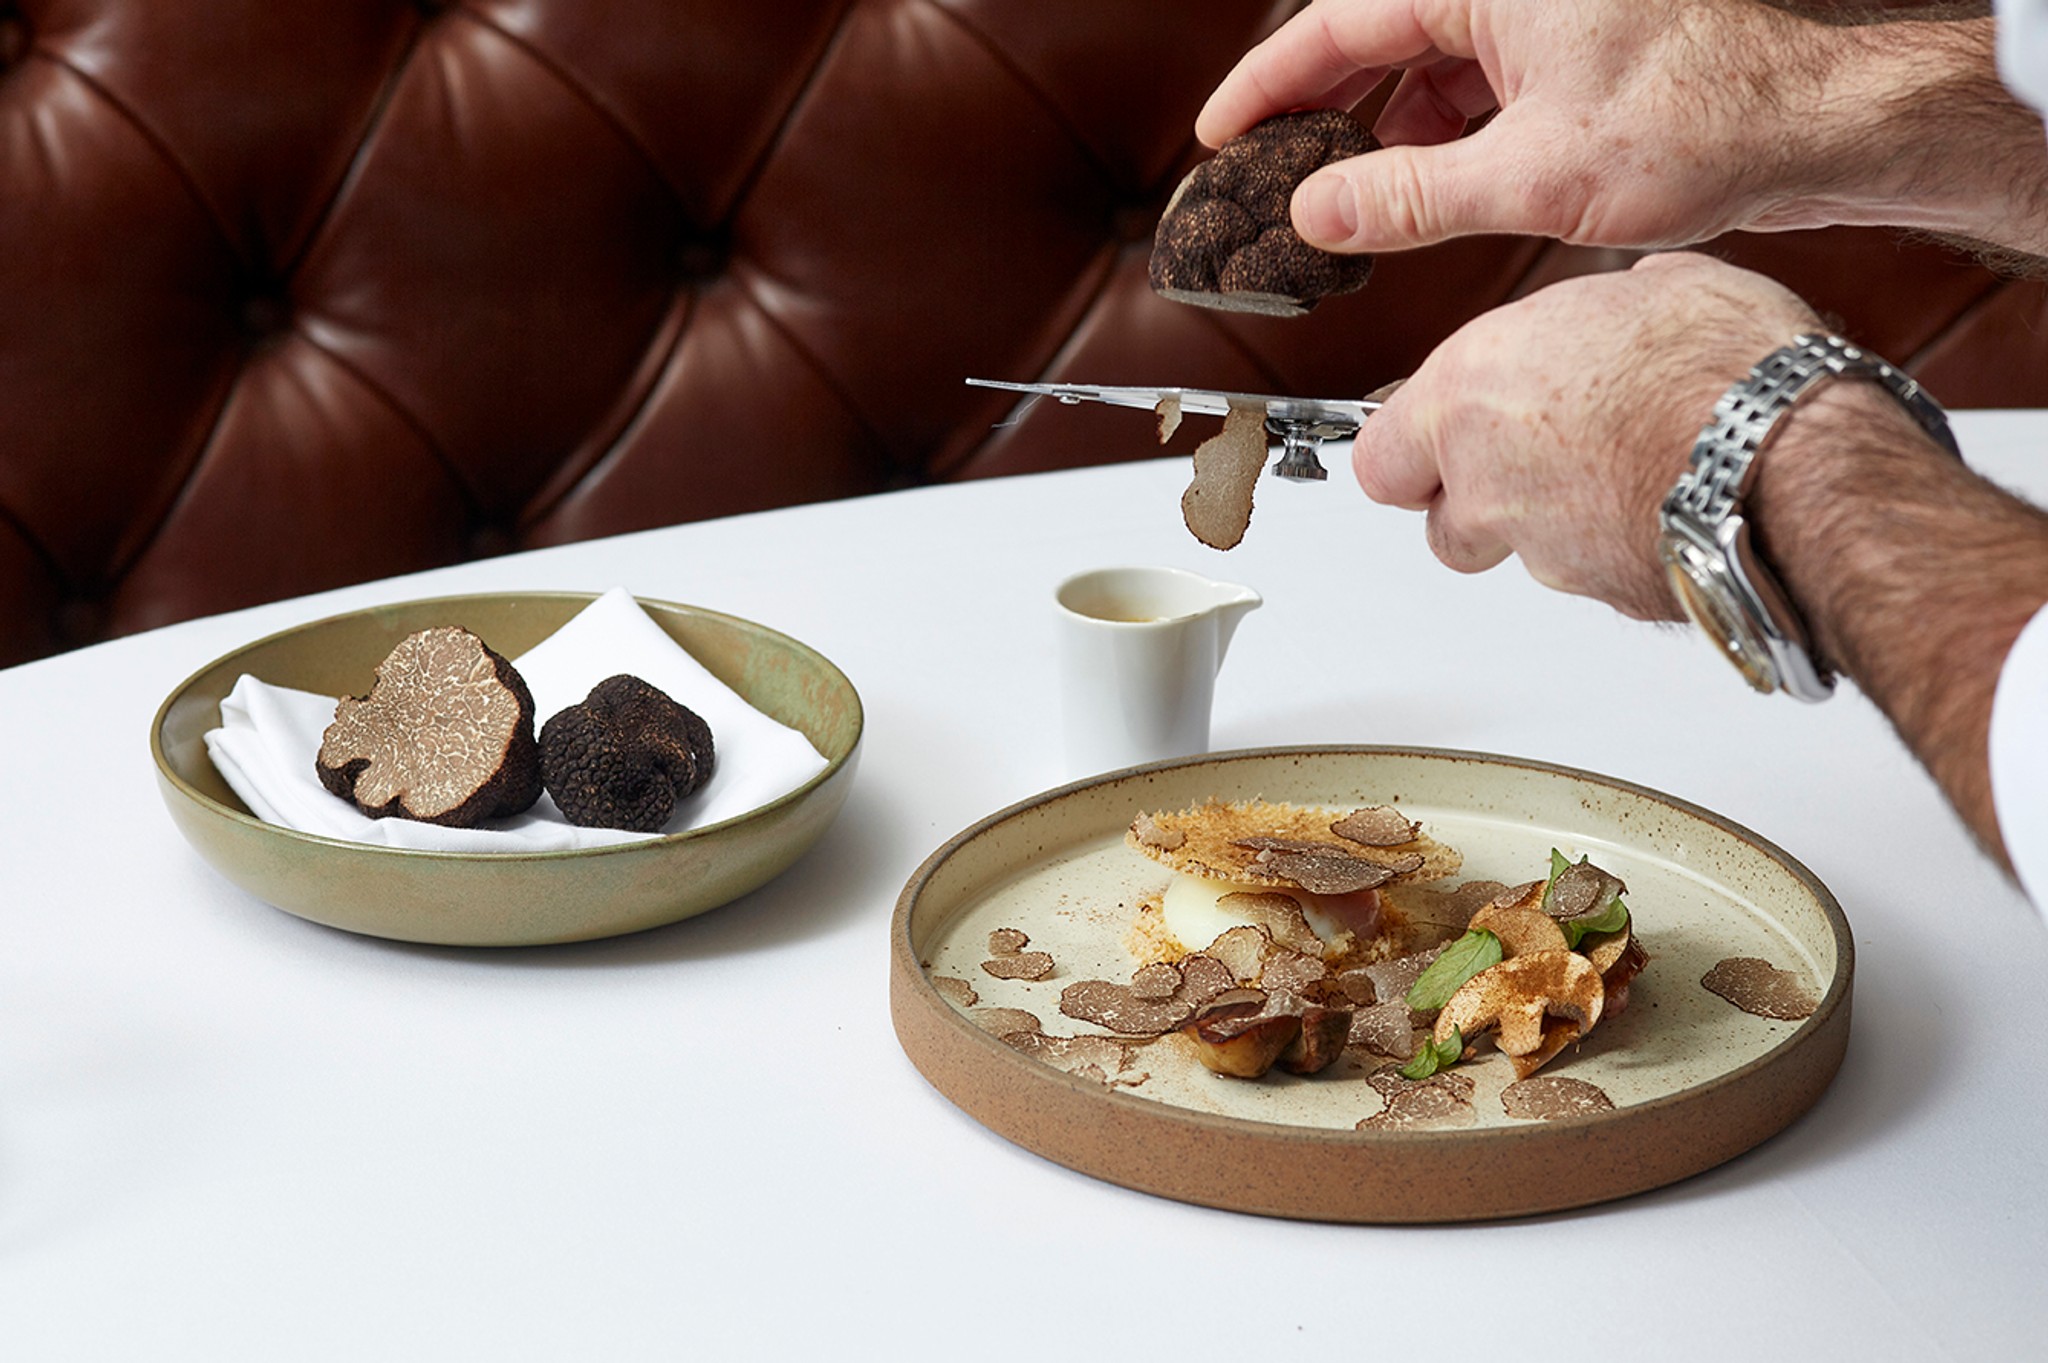 Hand grating truffle over a slow-cooked egg dish at Marcus Belgravia